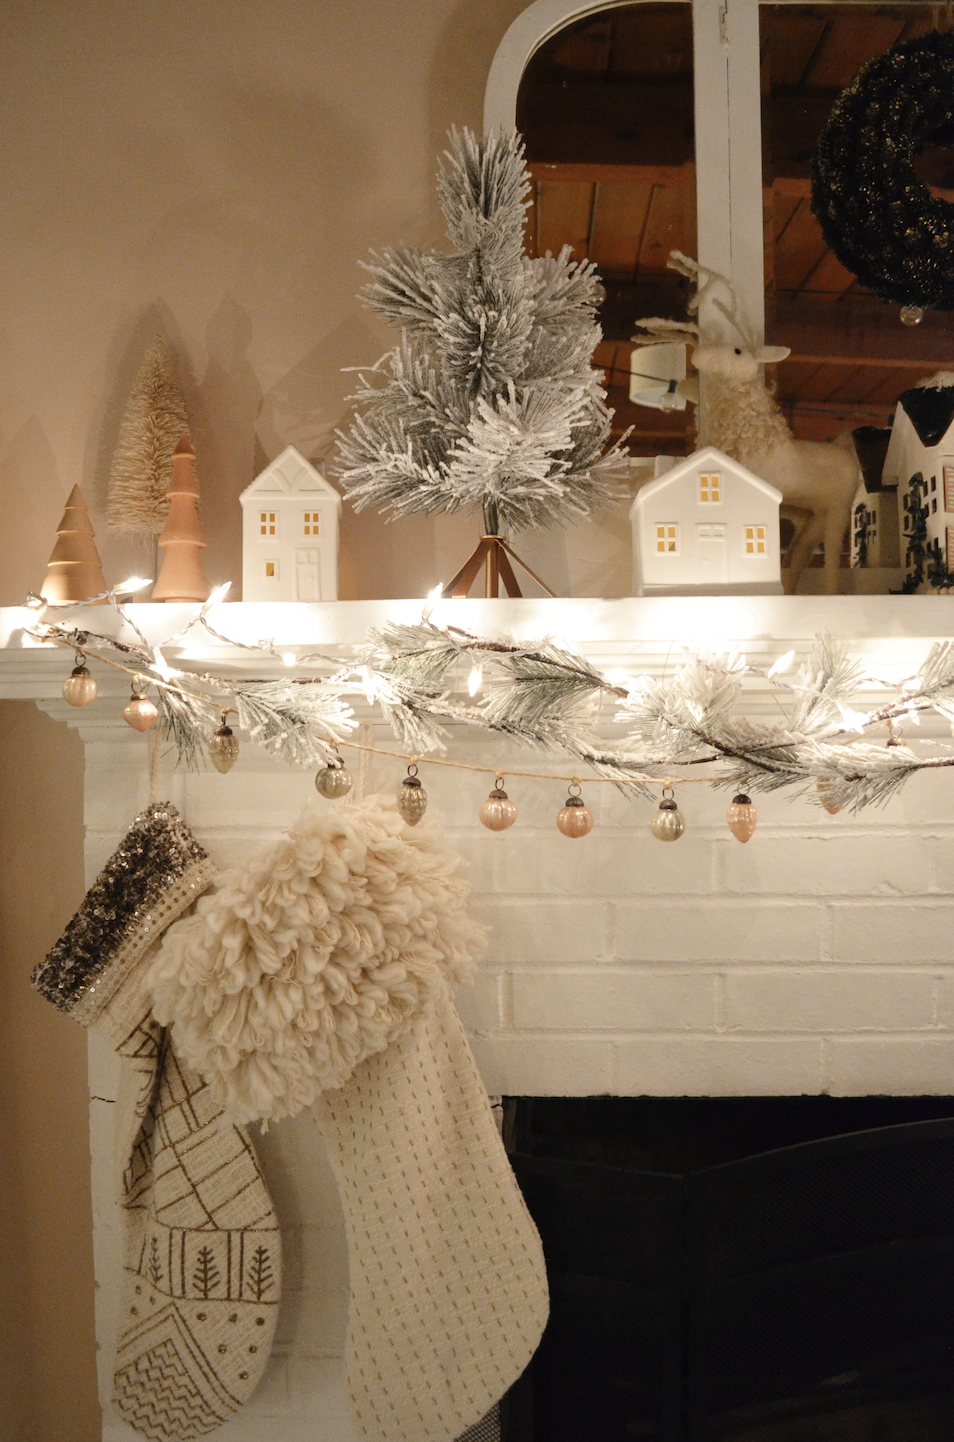  Claire Jackson of Birmingham, Alabama gives her crafting tips and tricks for the best holiday mantle. 